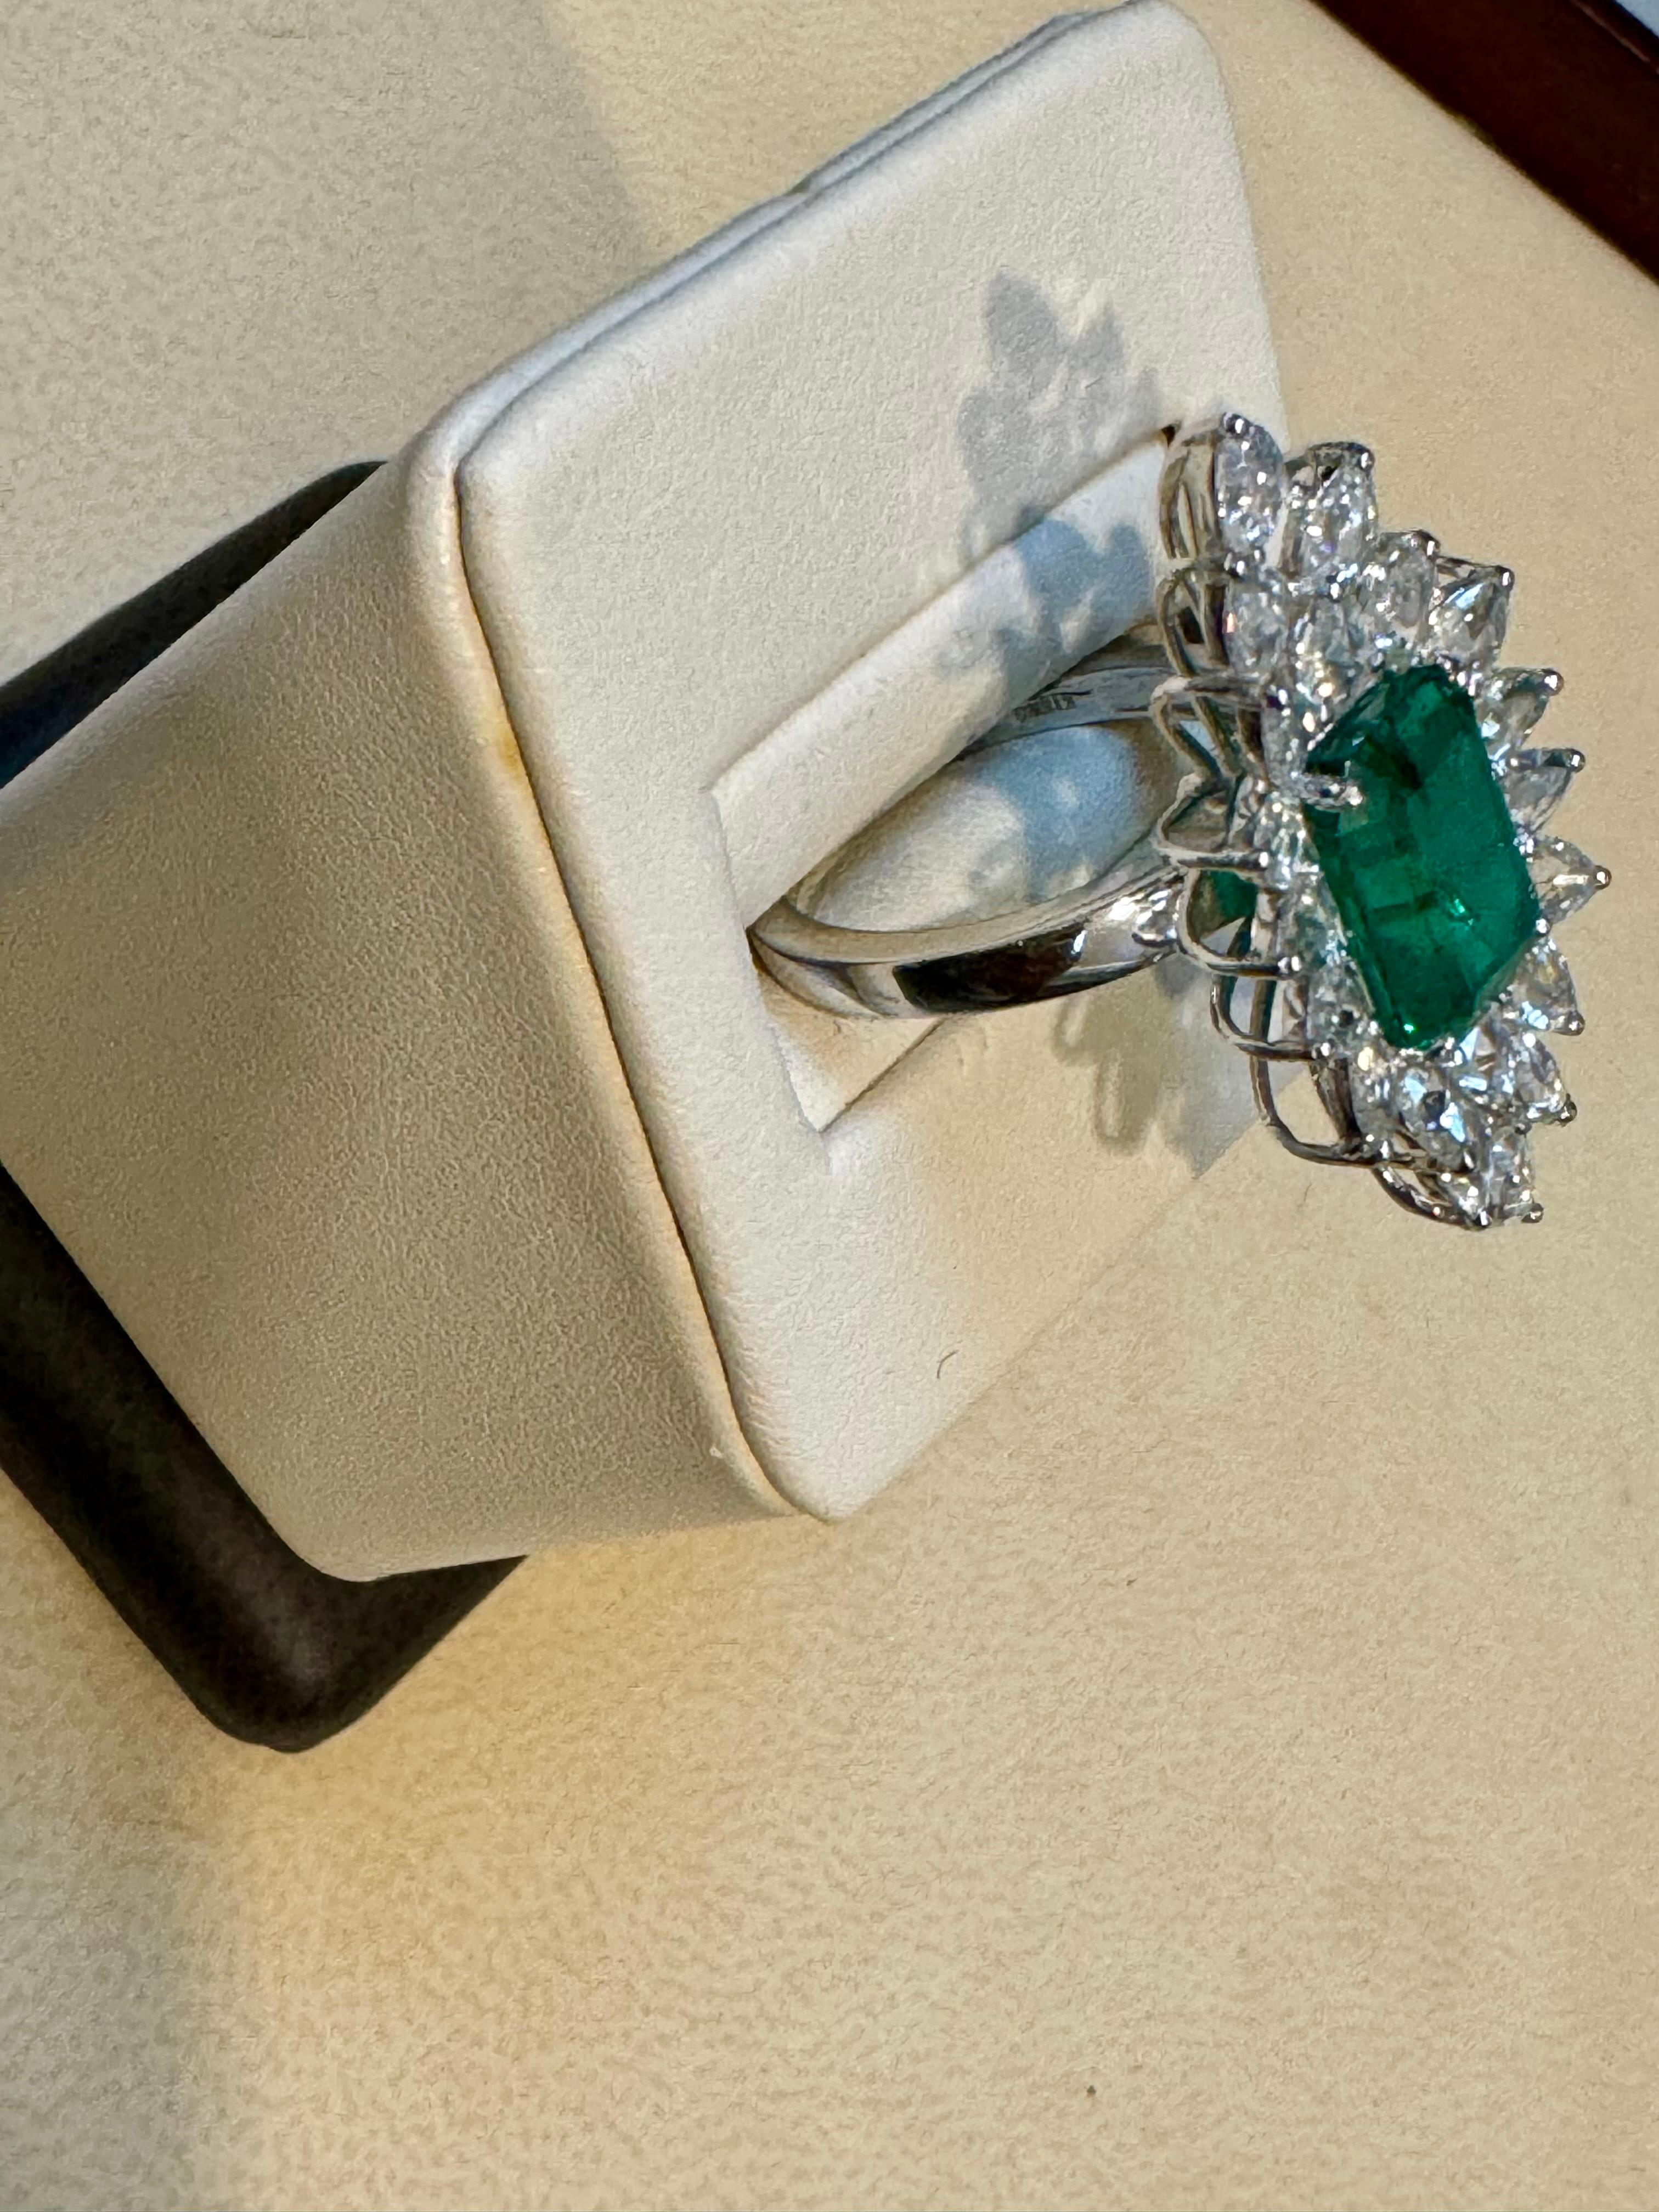 4Ct Finest Zambian Emerald Cut Emerald & 2.5Ct Diamond Ring, 18 Kt Gold Size 6.5
 This classic ring features an Emerald cut Zambian emerald of extreme fine quality, boasting a desirable color and luster, originating from  Zambia. Accompanied by many